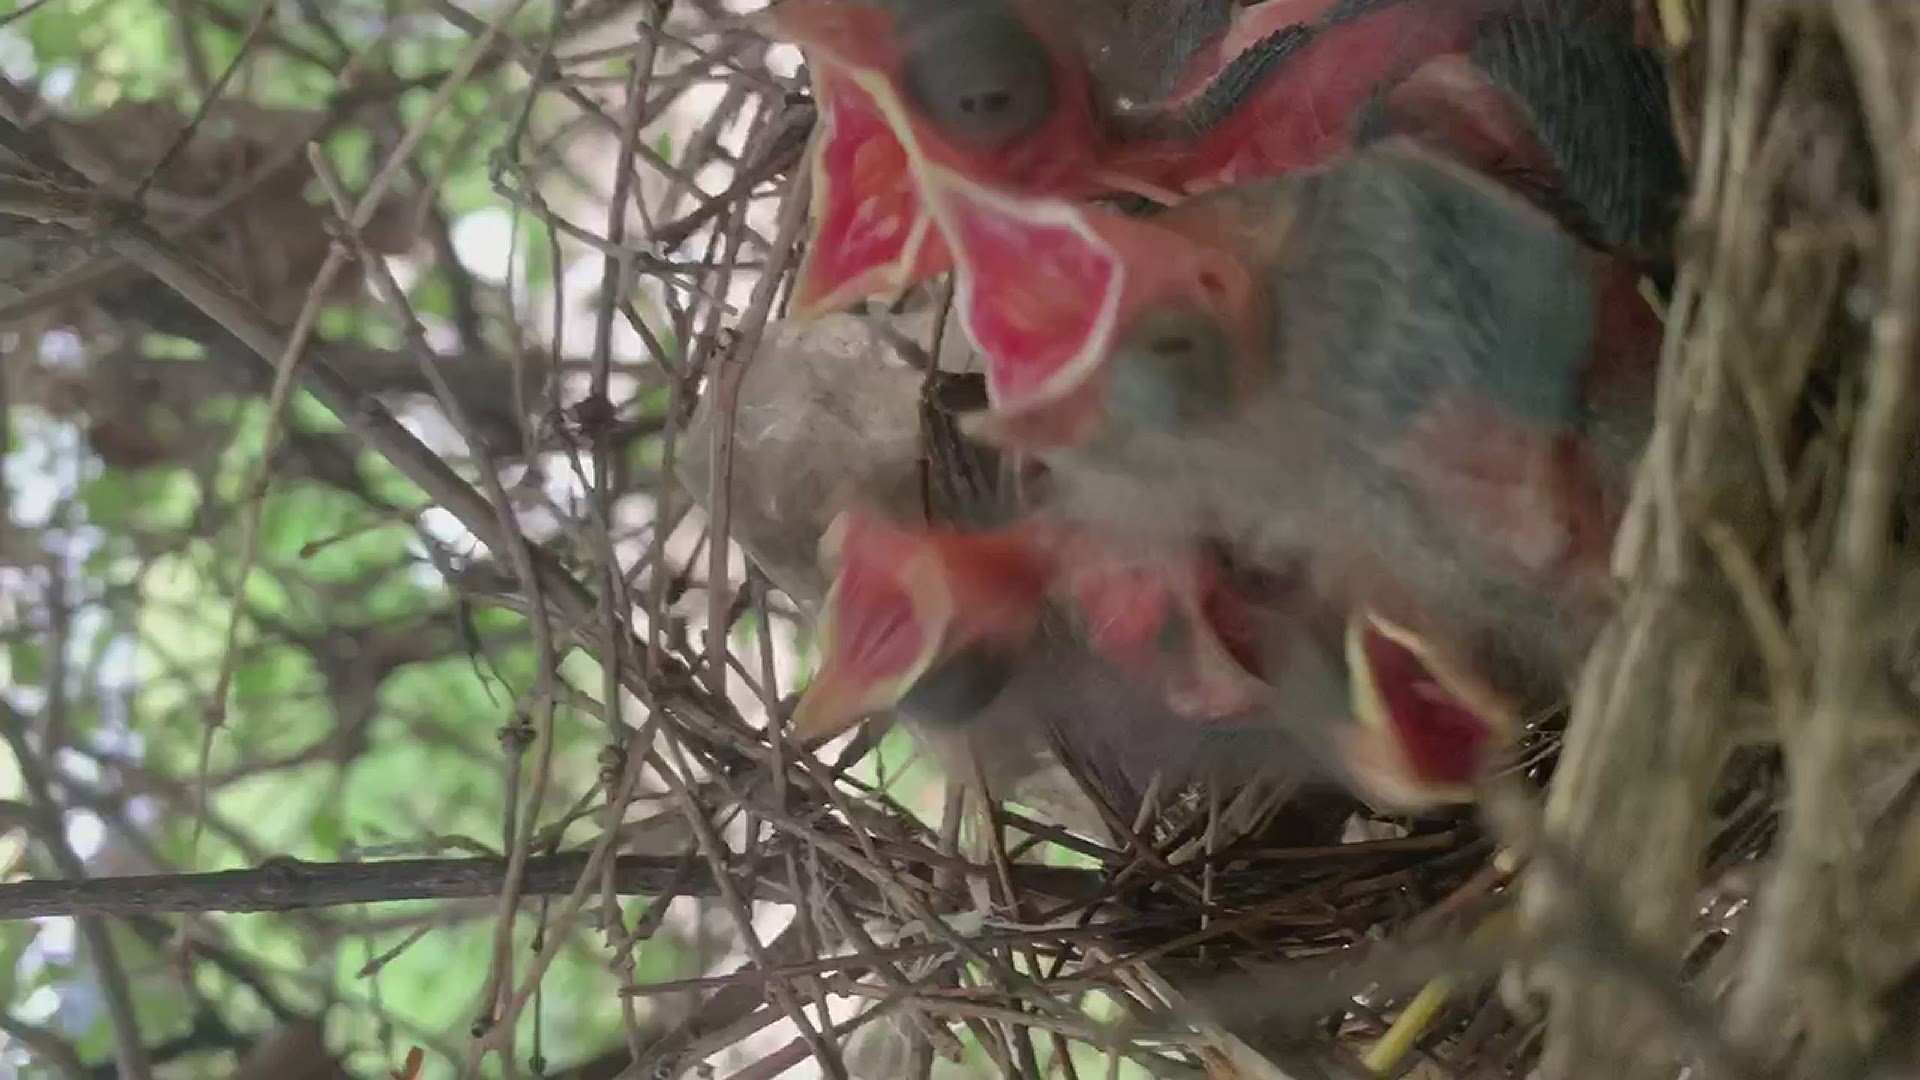 Four little cardinals are nesting in a lilac tree next to our front porch!
Credit: Greta Schramm